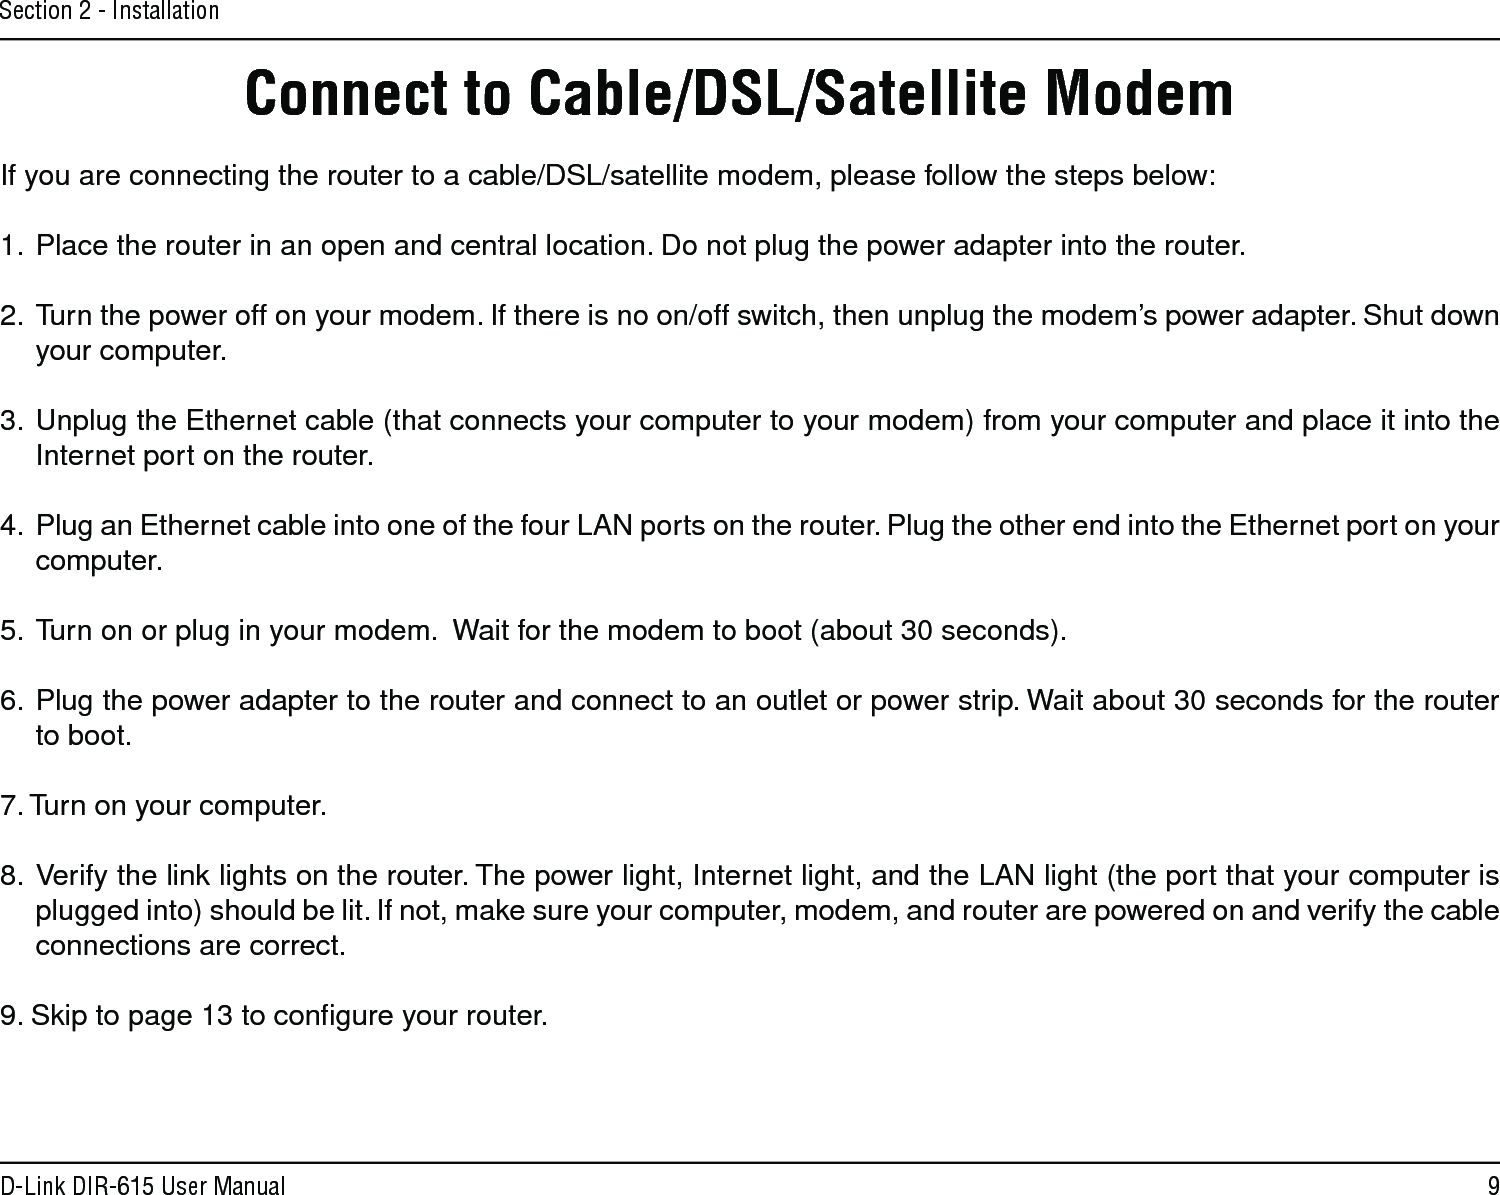 9D-Link DIR-615 User ManualSection 2 - InstallationIf you are connecting the router to a cable/DSL/satellite modem, please follow the steps below:1.  Place the router in an open and central location. Do not plug the power adapter into the router. 2.  Turn the power off on your modem. If there is no on/off switch, then unplug the modem’s power adapter. Shut down your computer.3.  Unplug the Ethernet cable (that connects your computer to your modem) from your computer and place it into the Internet port on the router.  4.  Plug an Ethernet cable into one of the four LAN ports on the router. Plug the other end into the Ethernet port on your computer.5.  Turn on or plug in your modem.  Wait for the modem to boot (about 30 seconds). 6.  Plug the power adapter to the router and connect to an outlet or power strip. Wait about 30 seconds for the router to boot. 7. Turn on your computer. 8.  Verify the link lights on the router. The power light, Internet light, and the LAN light (the port that your computer is plugged into) should be lit. If not, make sure your computer, modem, and router are powered on and verify the cable connections are correct. 9. Skip to page 13 to conﬁgure your router. Connect to Cable/DSL/Satellite Modem